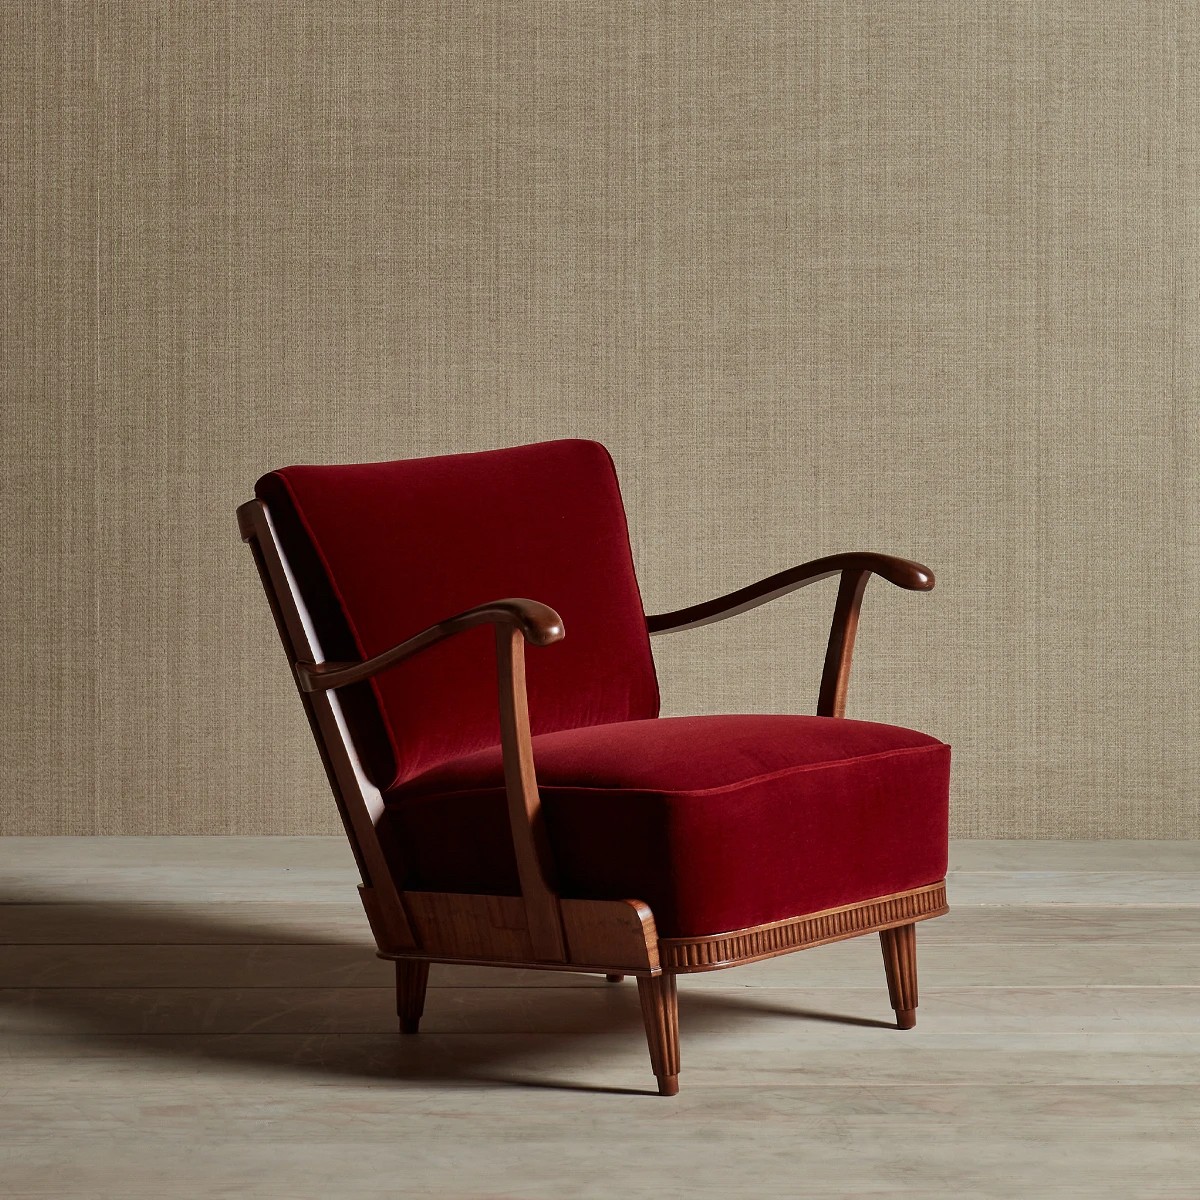 The image of an Svante Skogh Armchair product